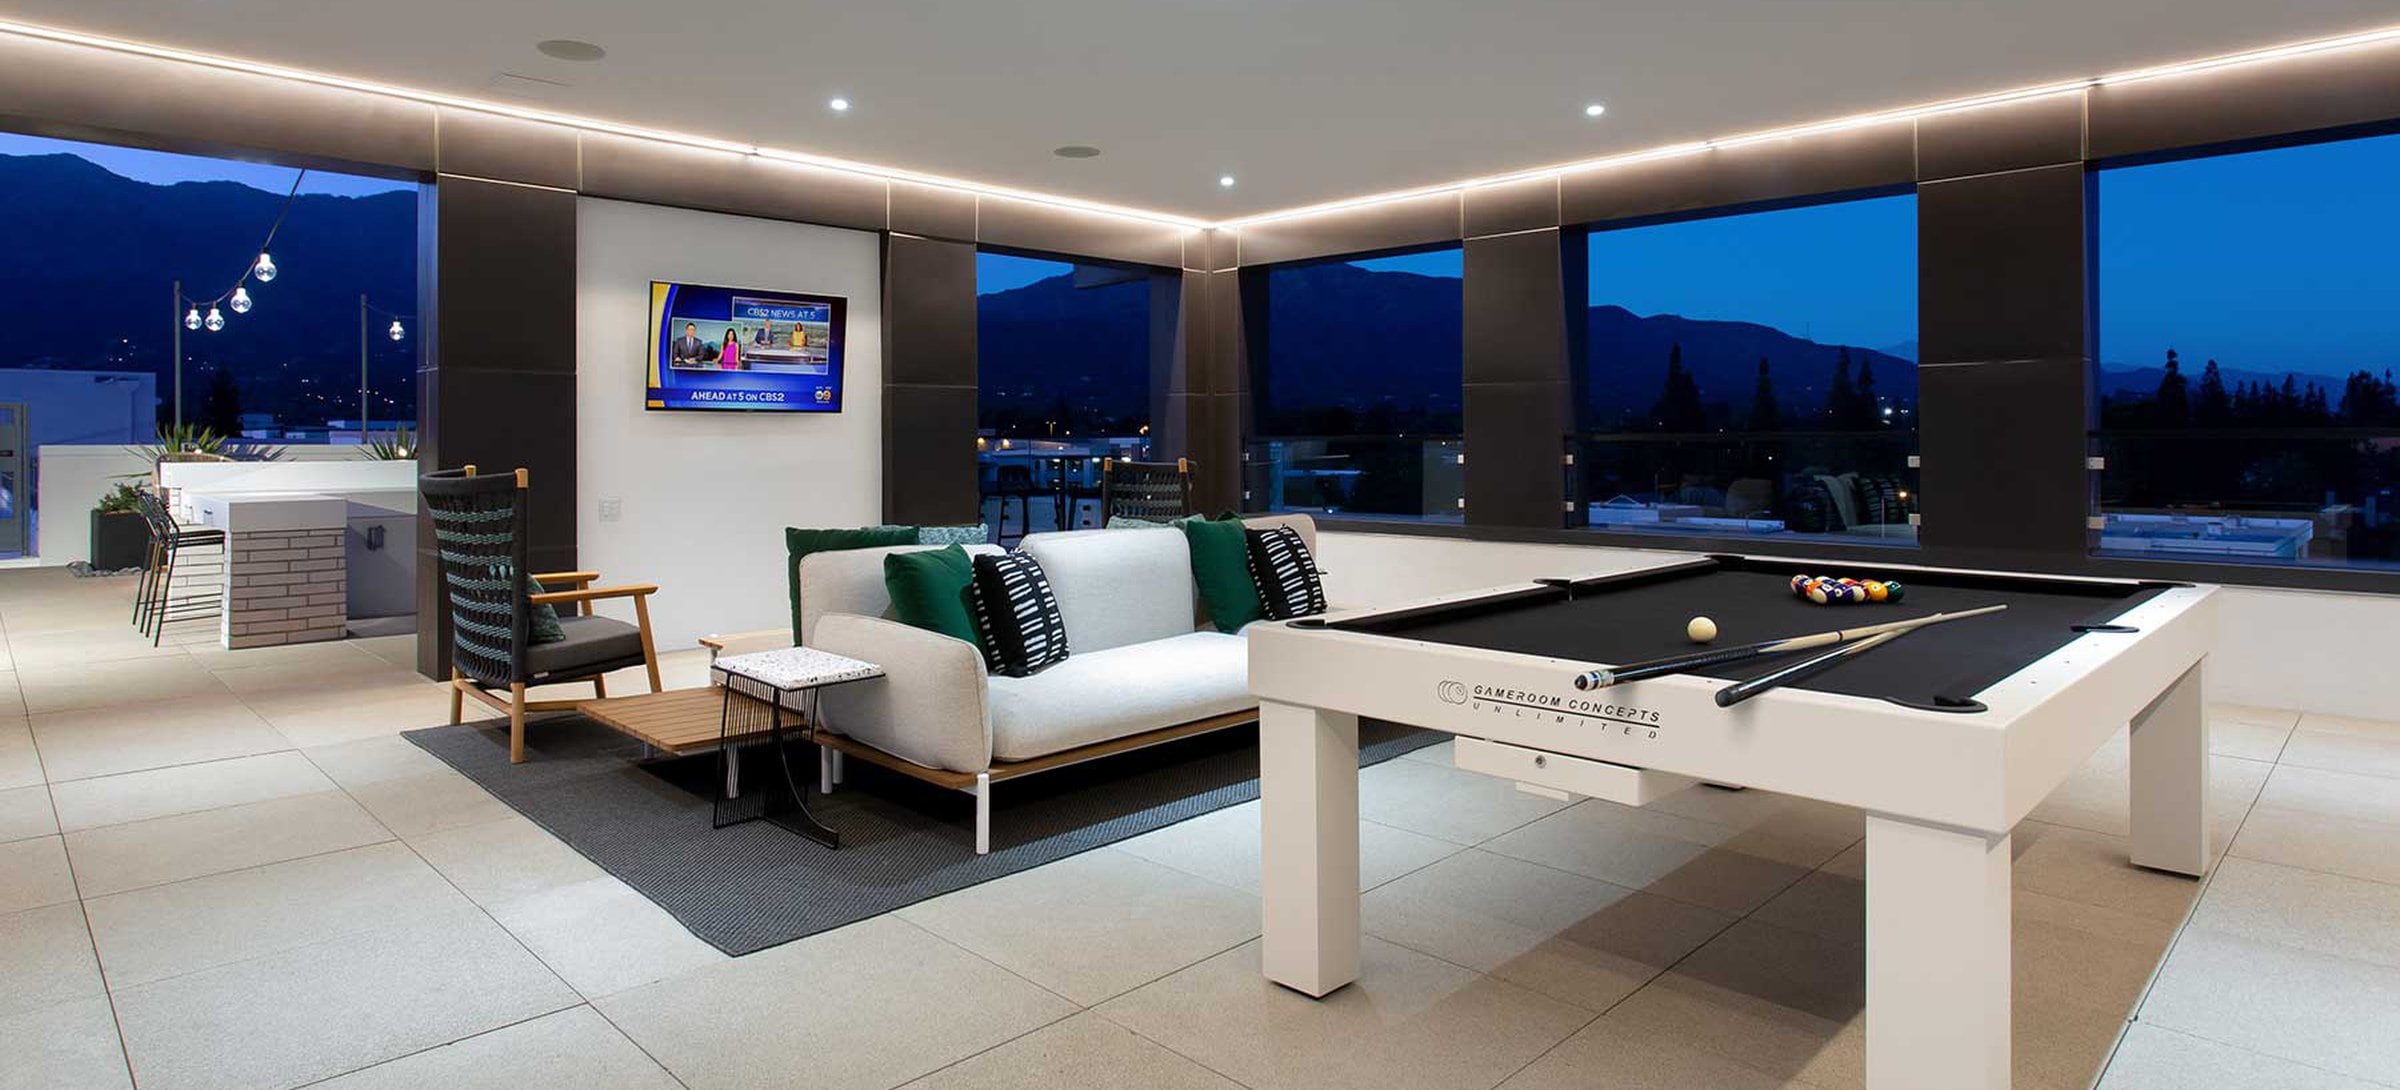 Rooftop indoor lounge with game area and lounge seating